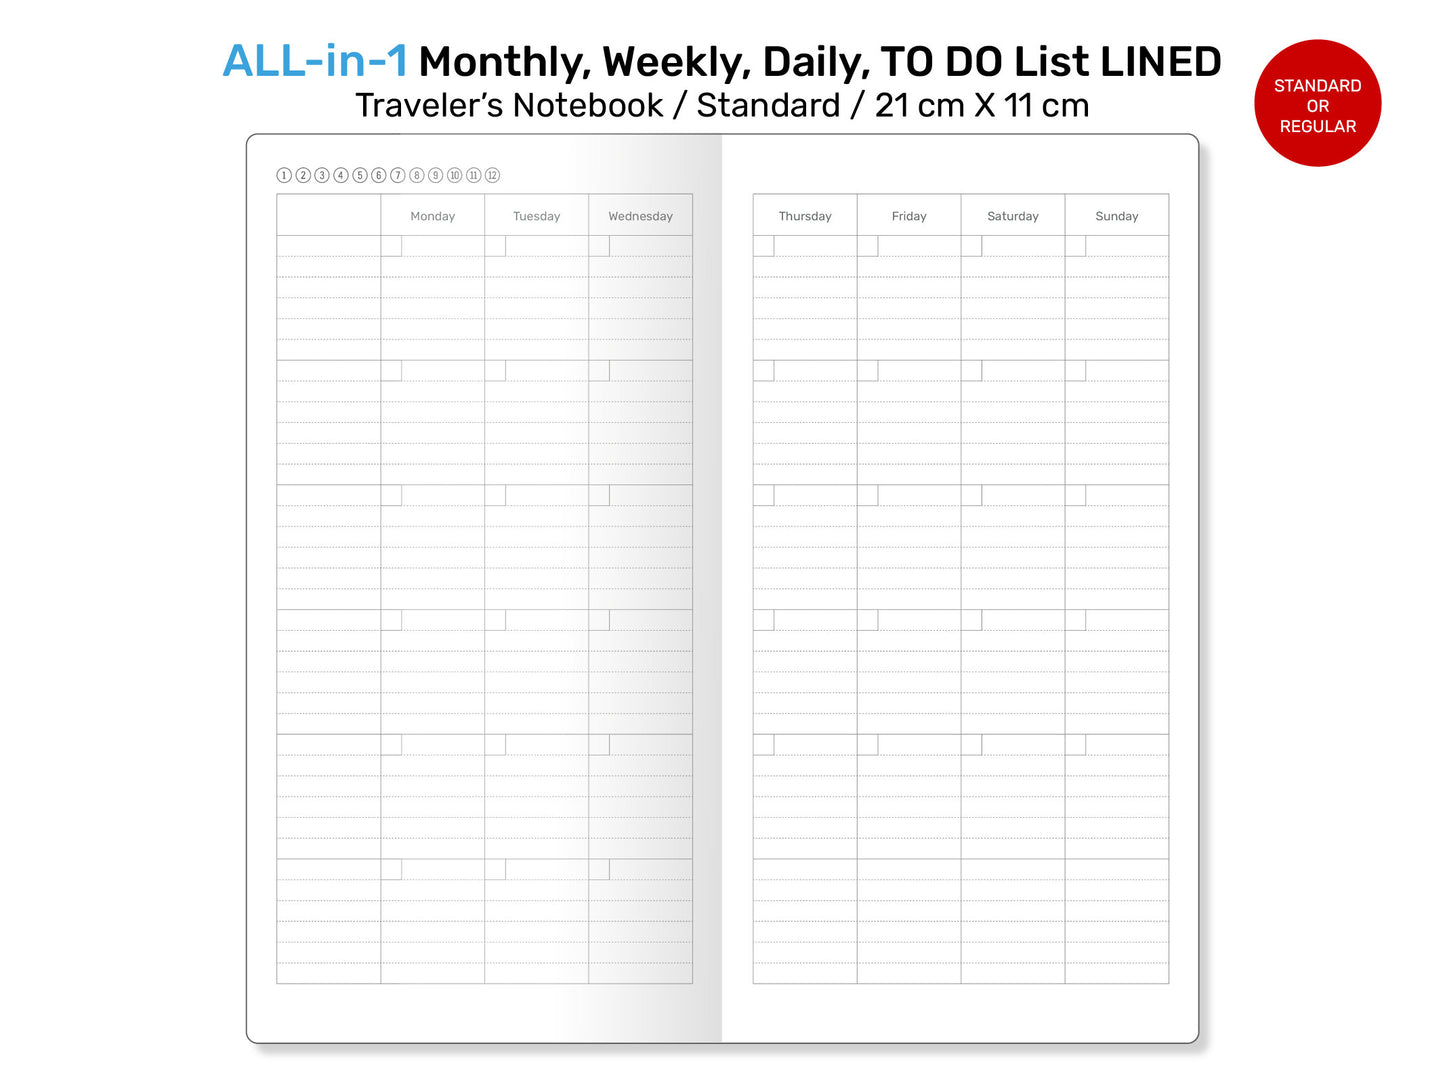 Standard TN ALL-in-1 Monthly, Weekly, Daily, List Printable Traveler's Notebook Refill Insert LINED - Minimalist Functional RTN022-003B